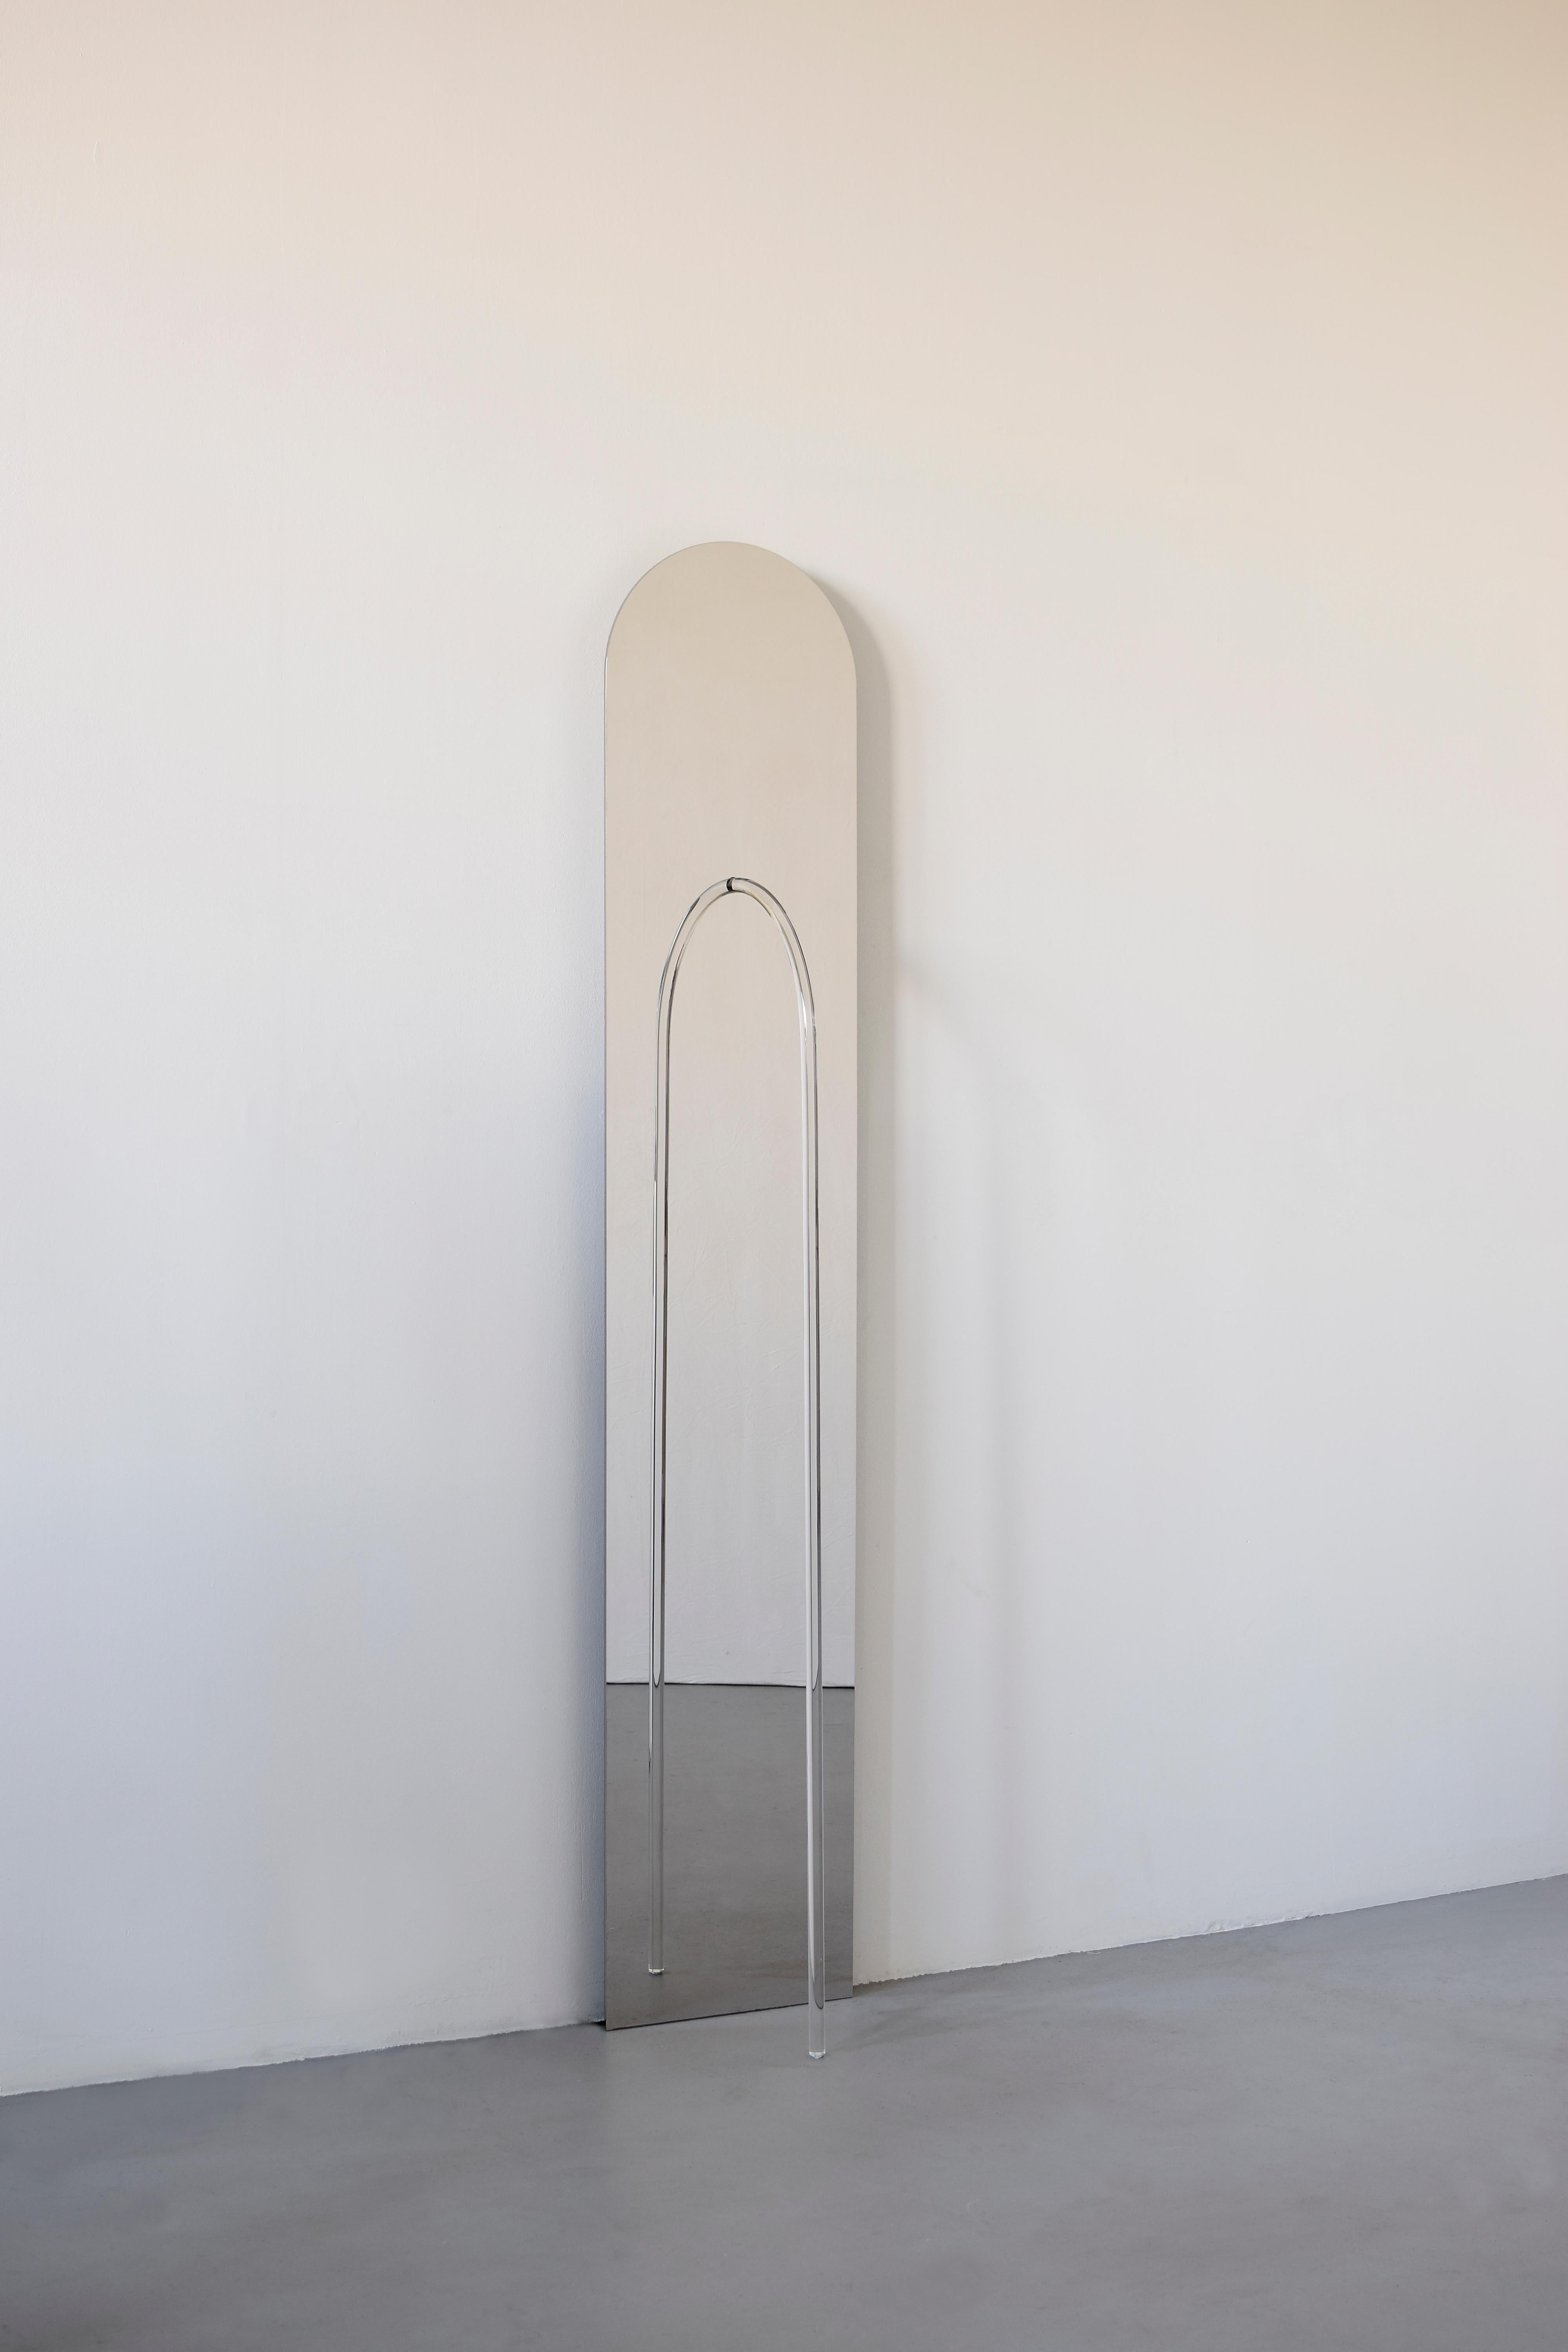 Elusive 05
A beautiful piece exploring the line between visible and invisible: half mirror, half floor lamp, half sculpture.
By Maximilian Michaelis.

Polished stainless steel, acrylic glass, Led
Measure: 190 x 36 x 26 cm.